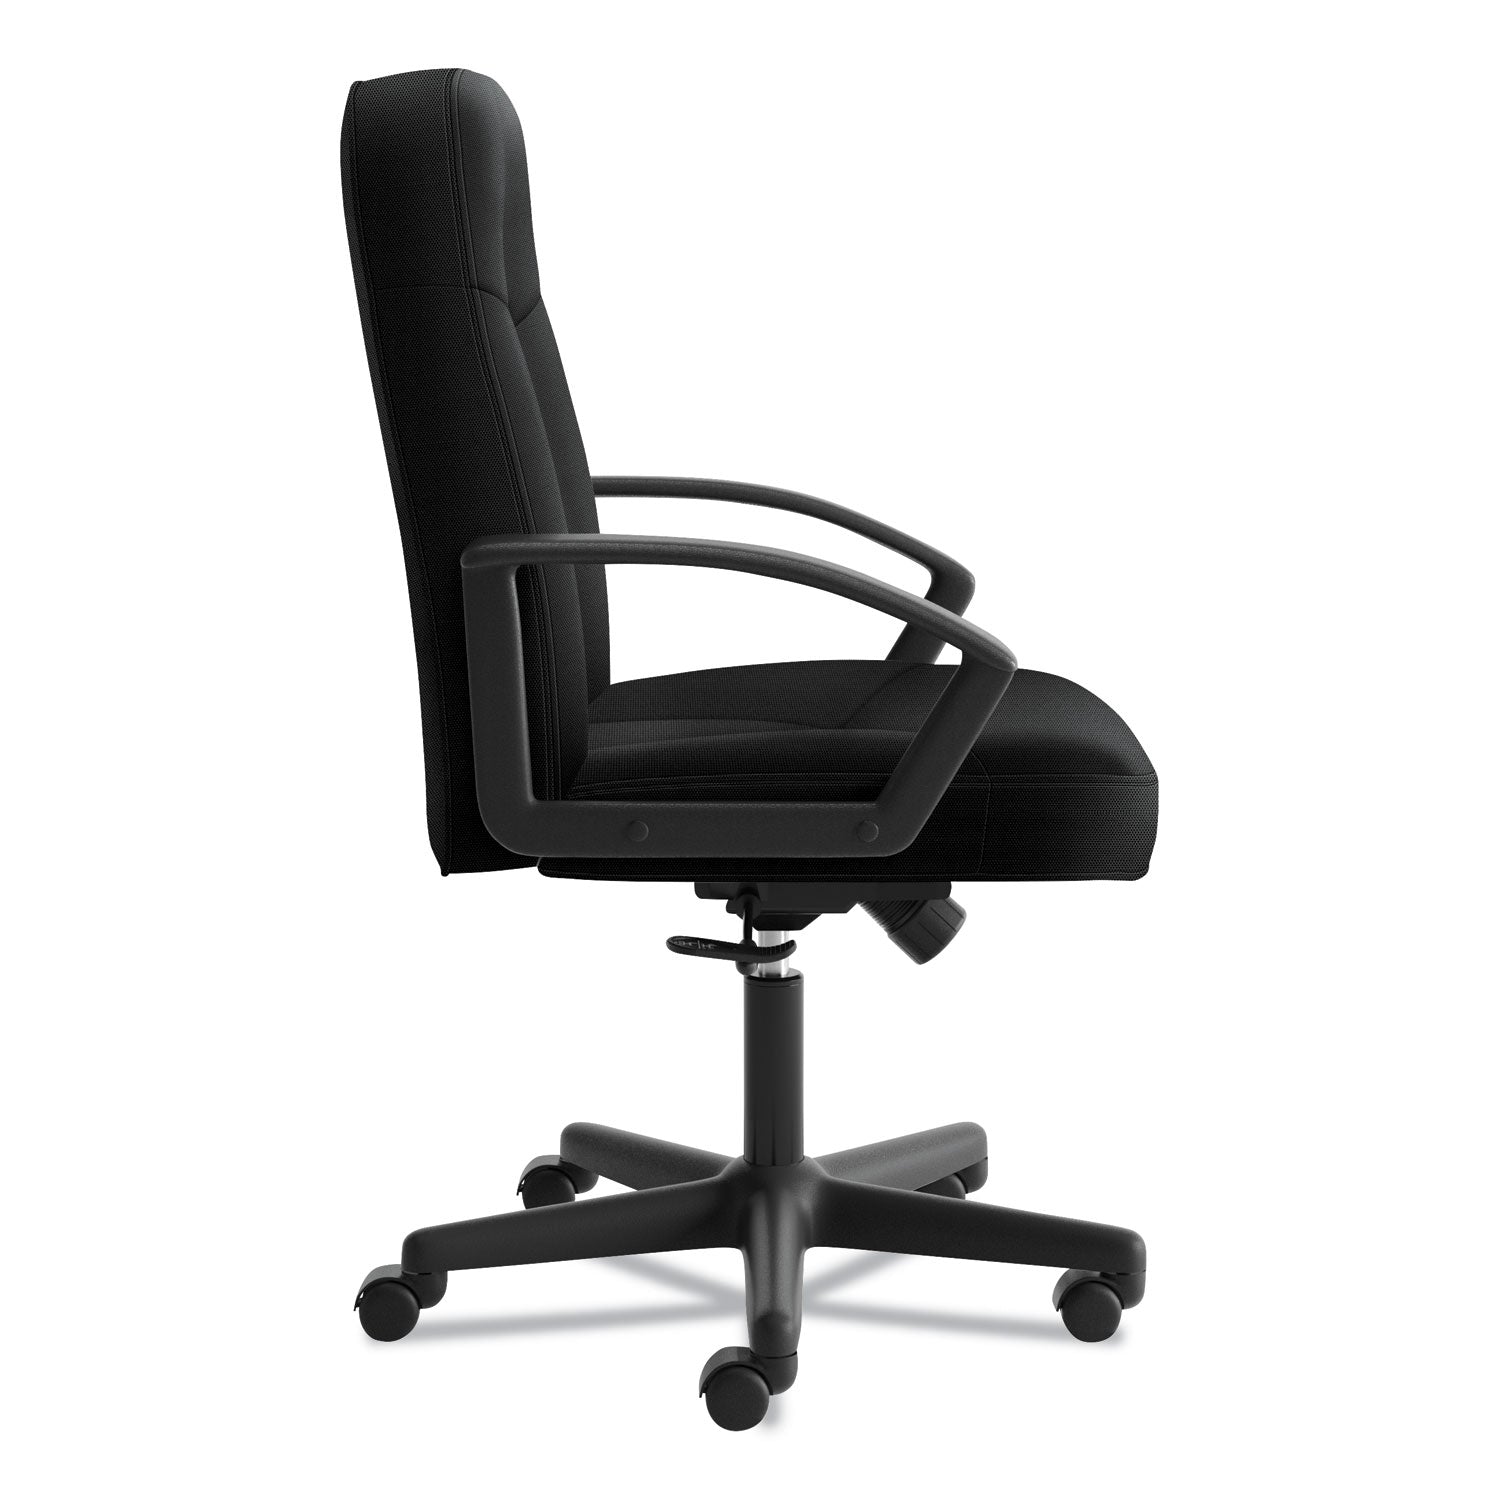 HVL601 Series Executive High-Back Chair, Supports Up to 250 lb, 17.44" to 20.94" Seat Height, Black - 